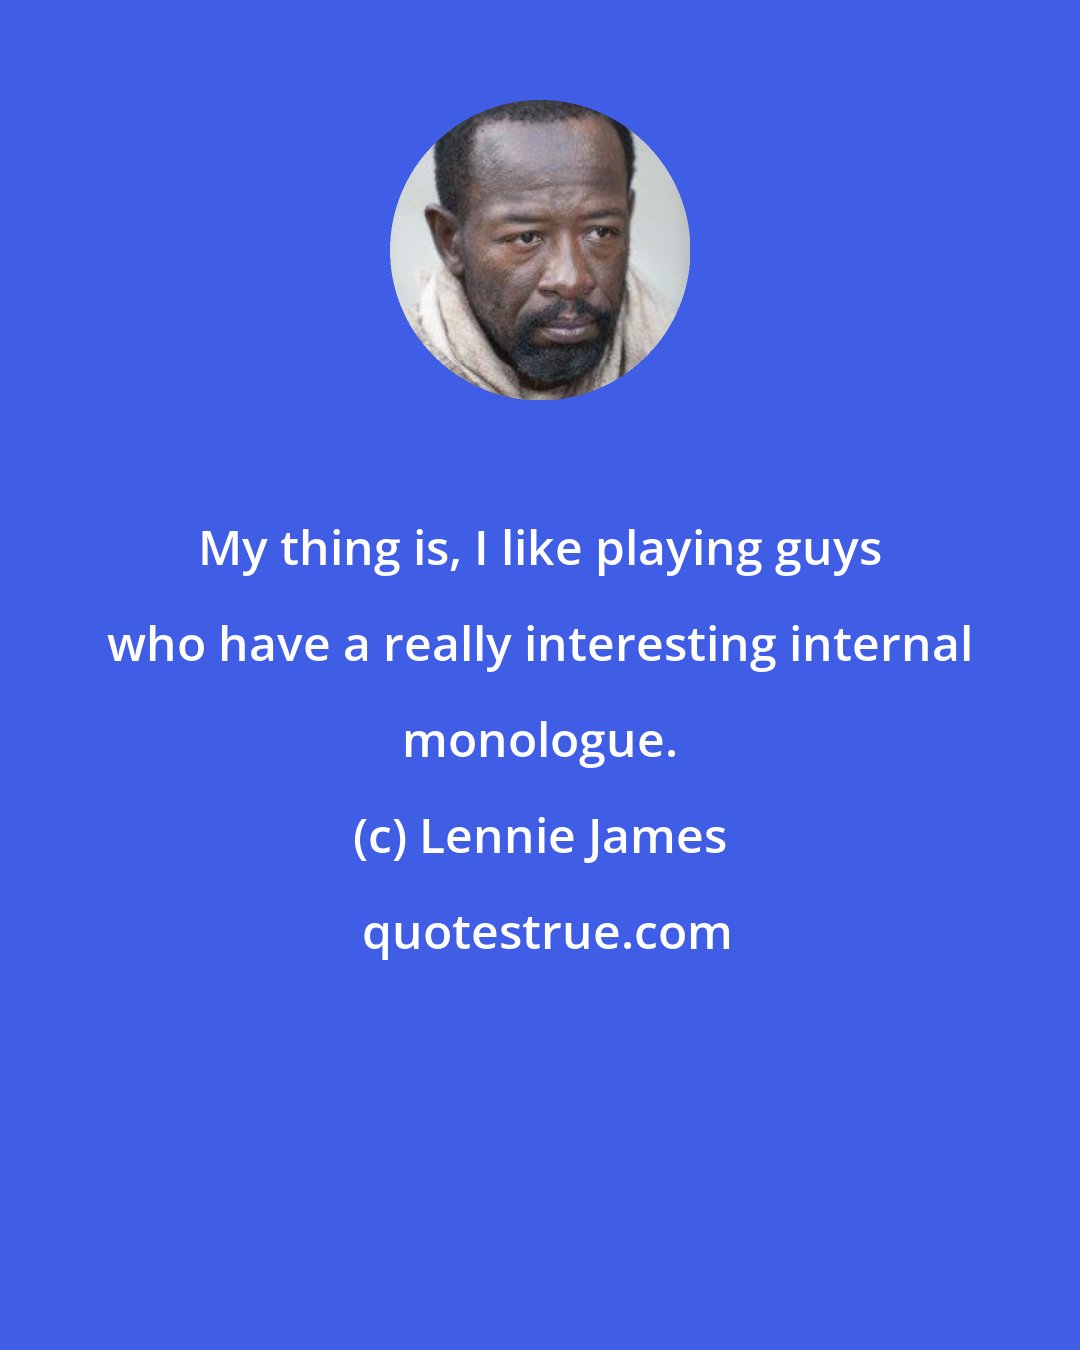 Lennie James: My thing is, I like playing guys who have a really interesting internal monologue.